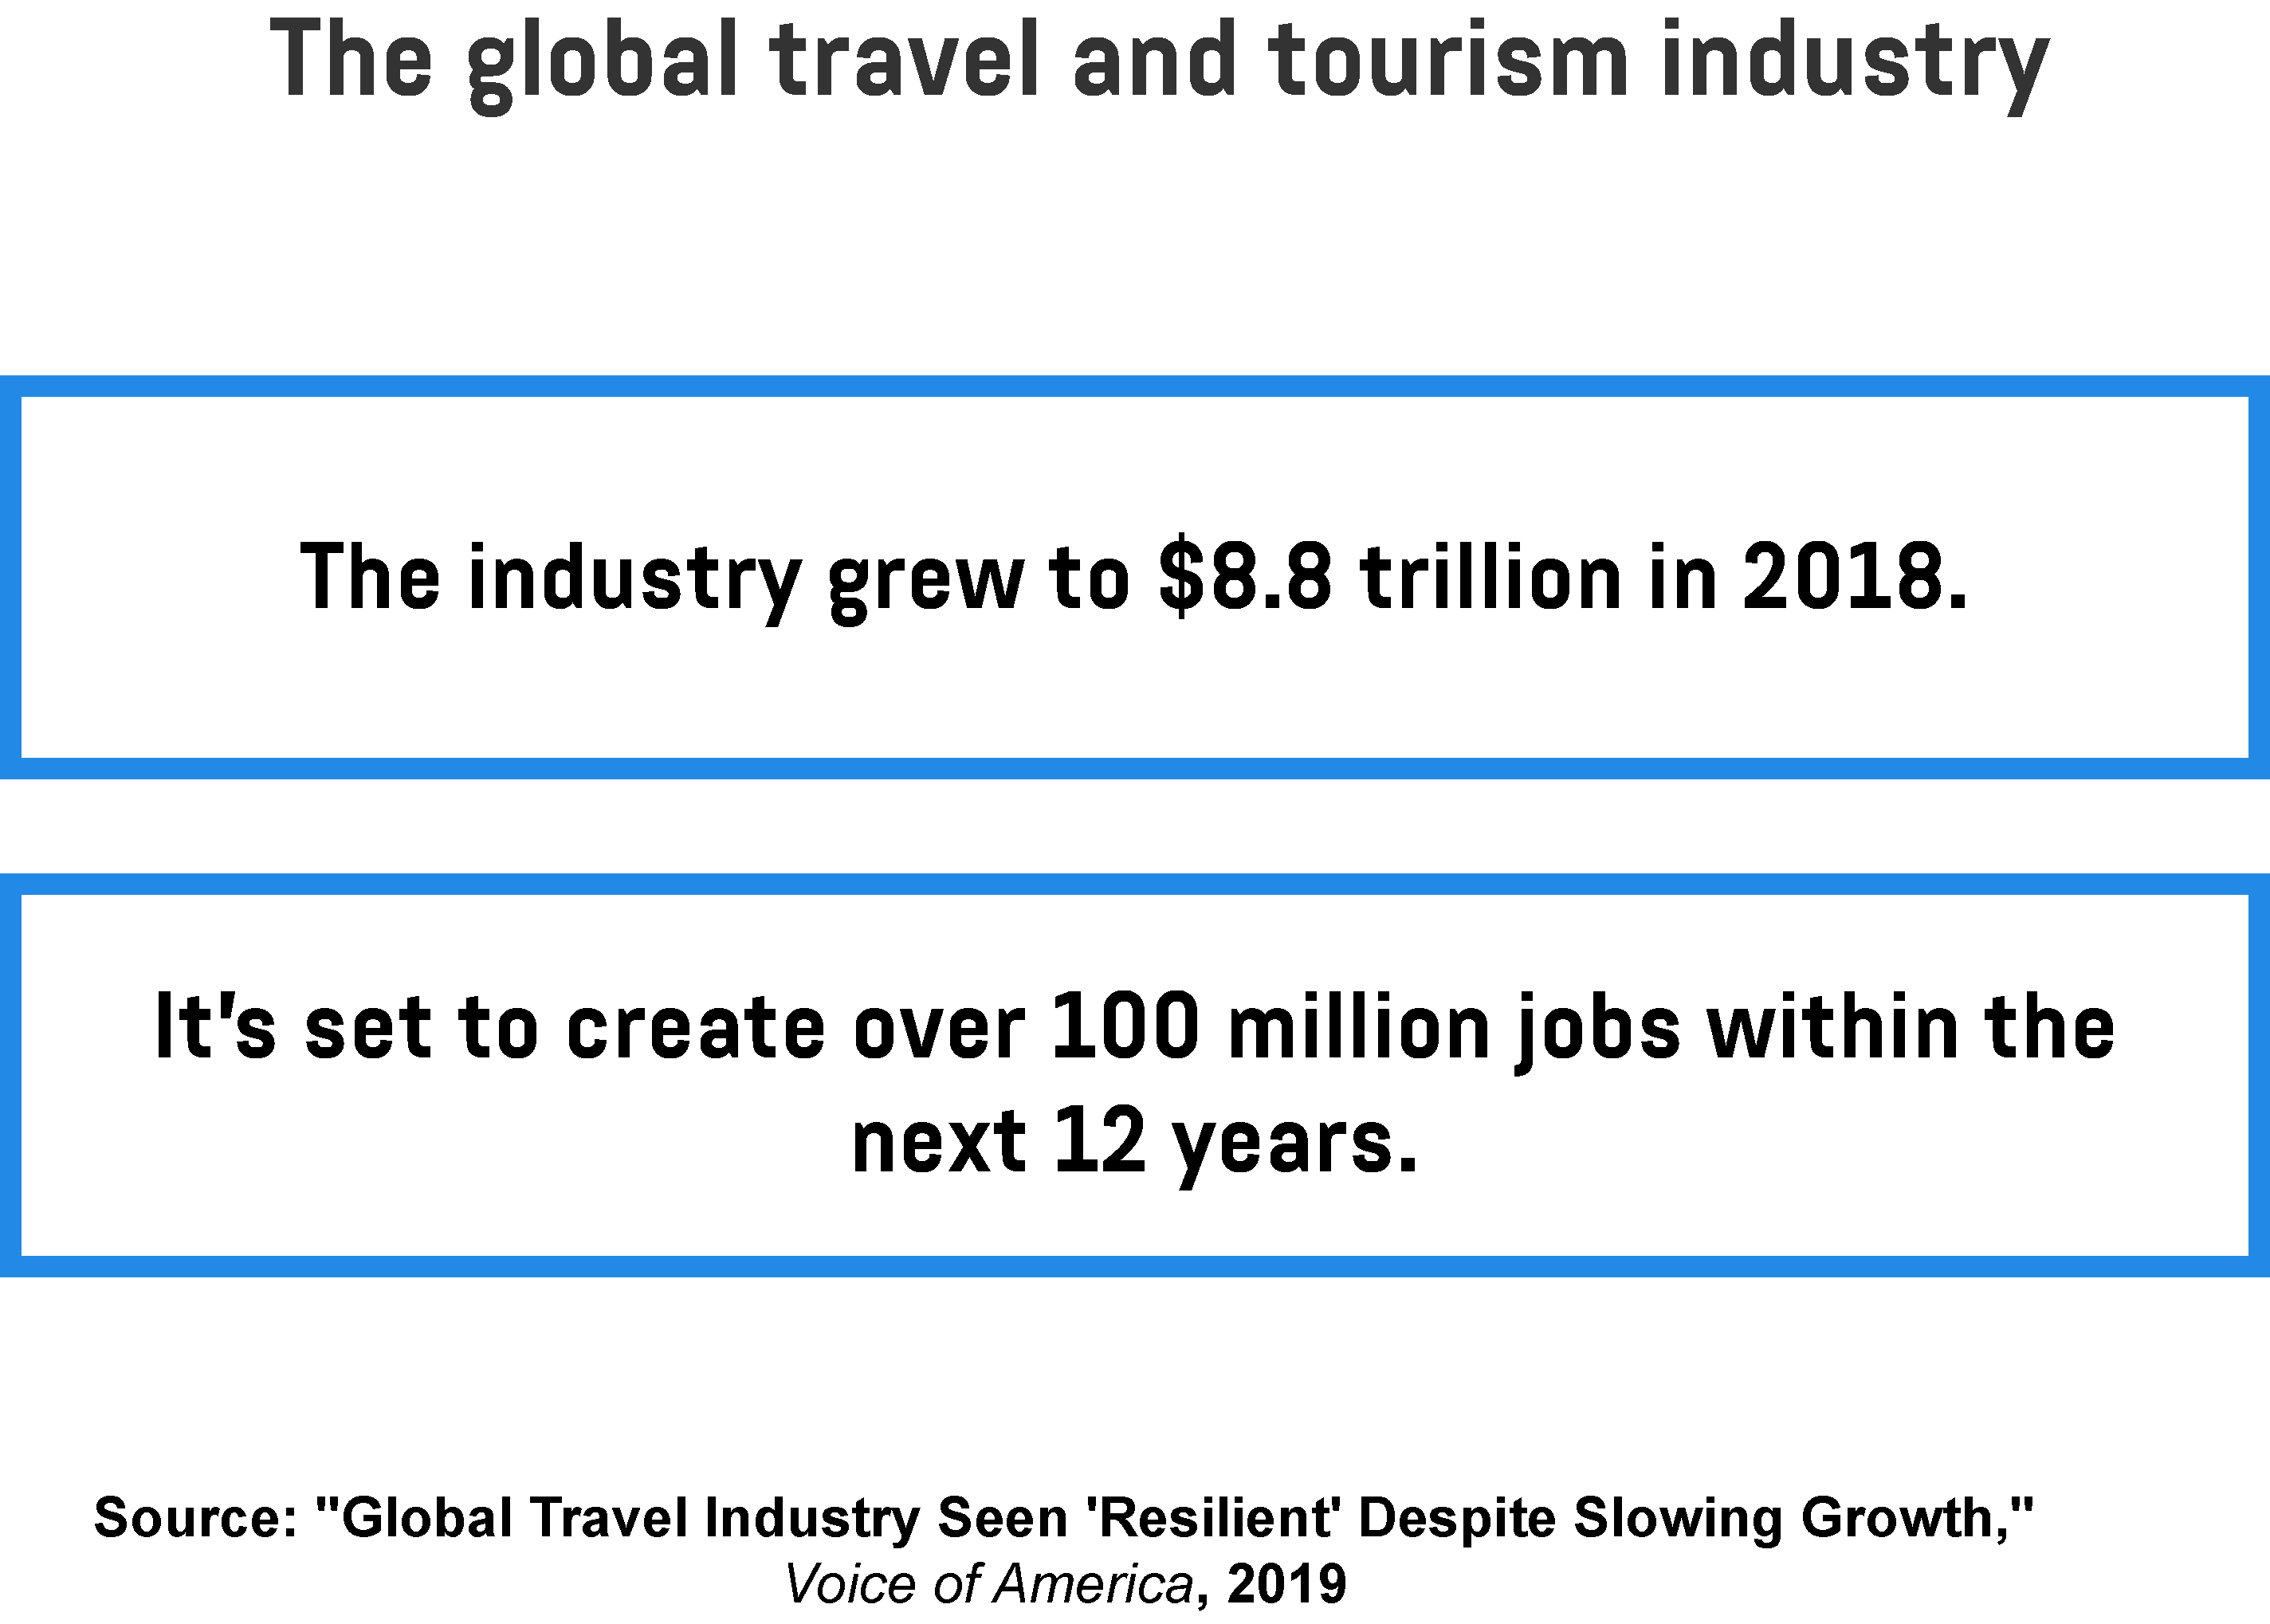 Two text boxes that detail the growth of the global travel and tourism industry and how many jobs it’ll create within the next 12 years. 